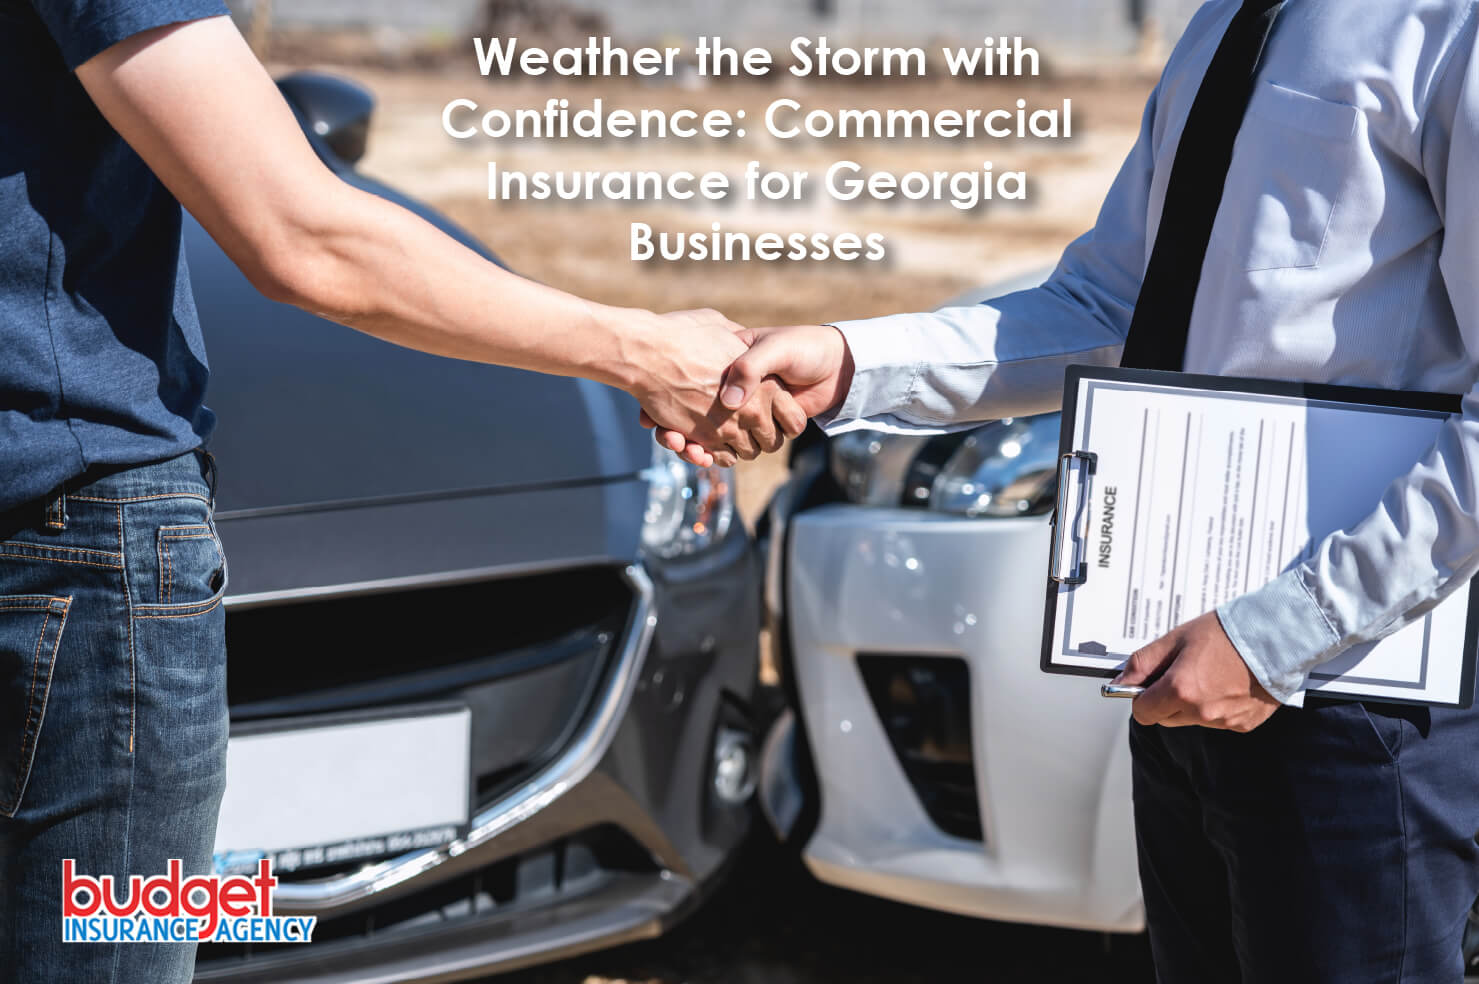 Weather the Storm with Confidence: Commercial Insurance for Georgia Businesses